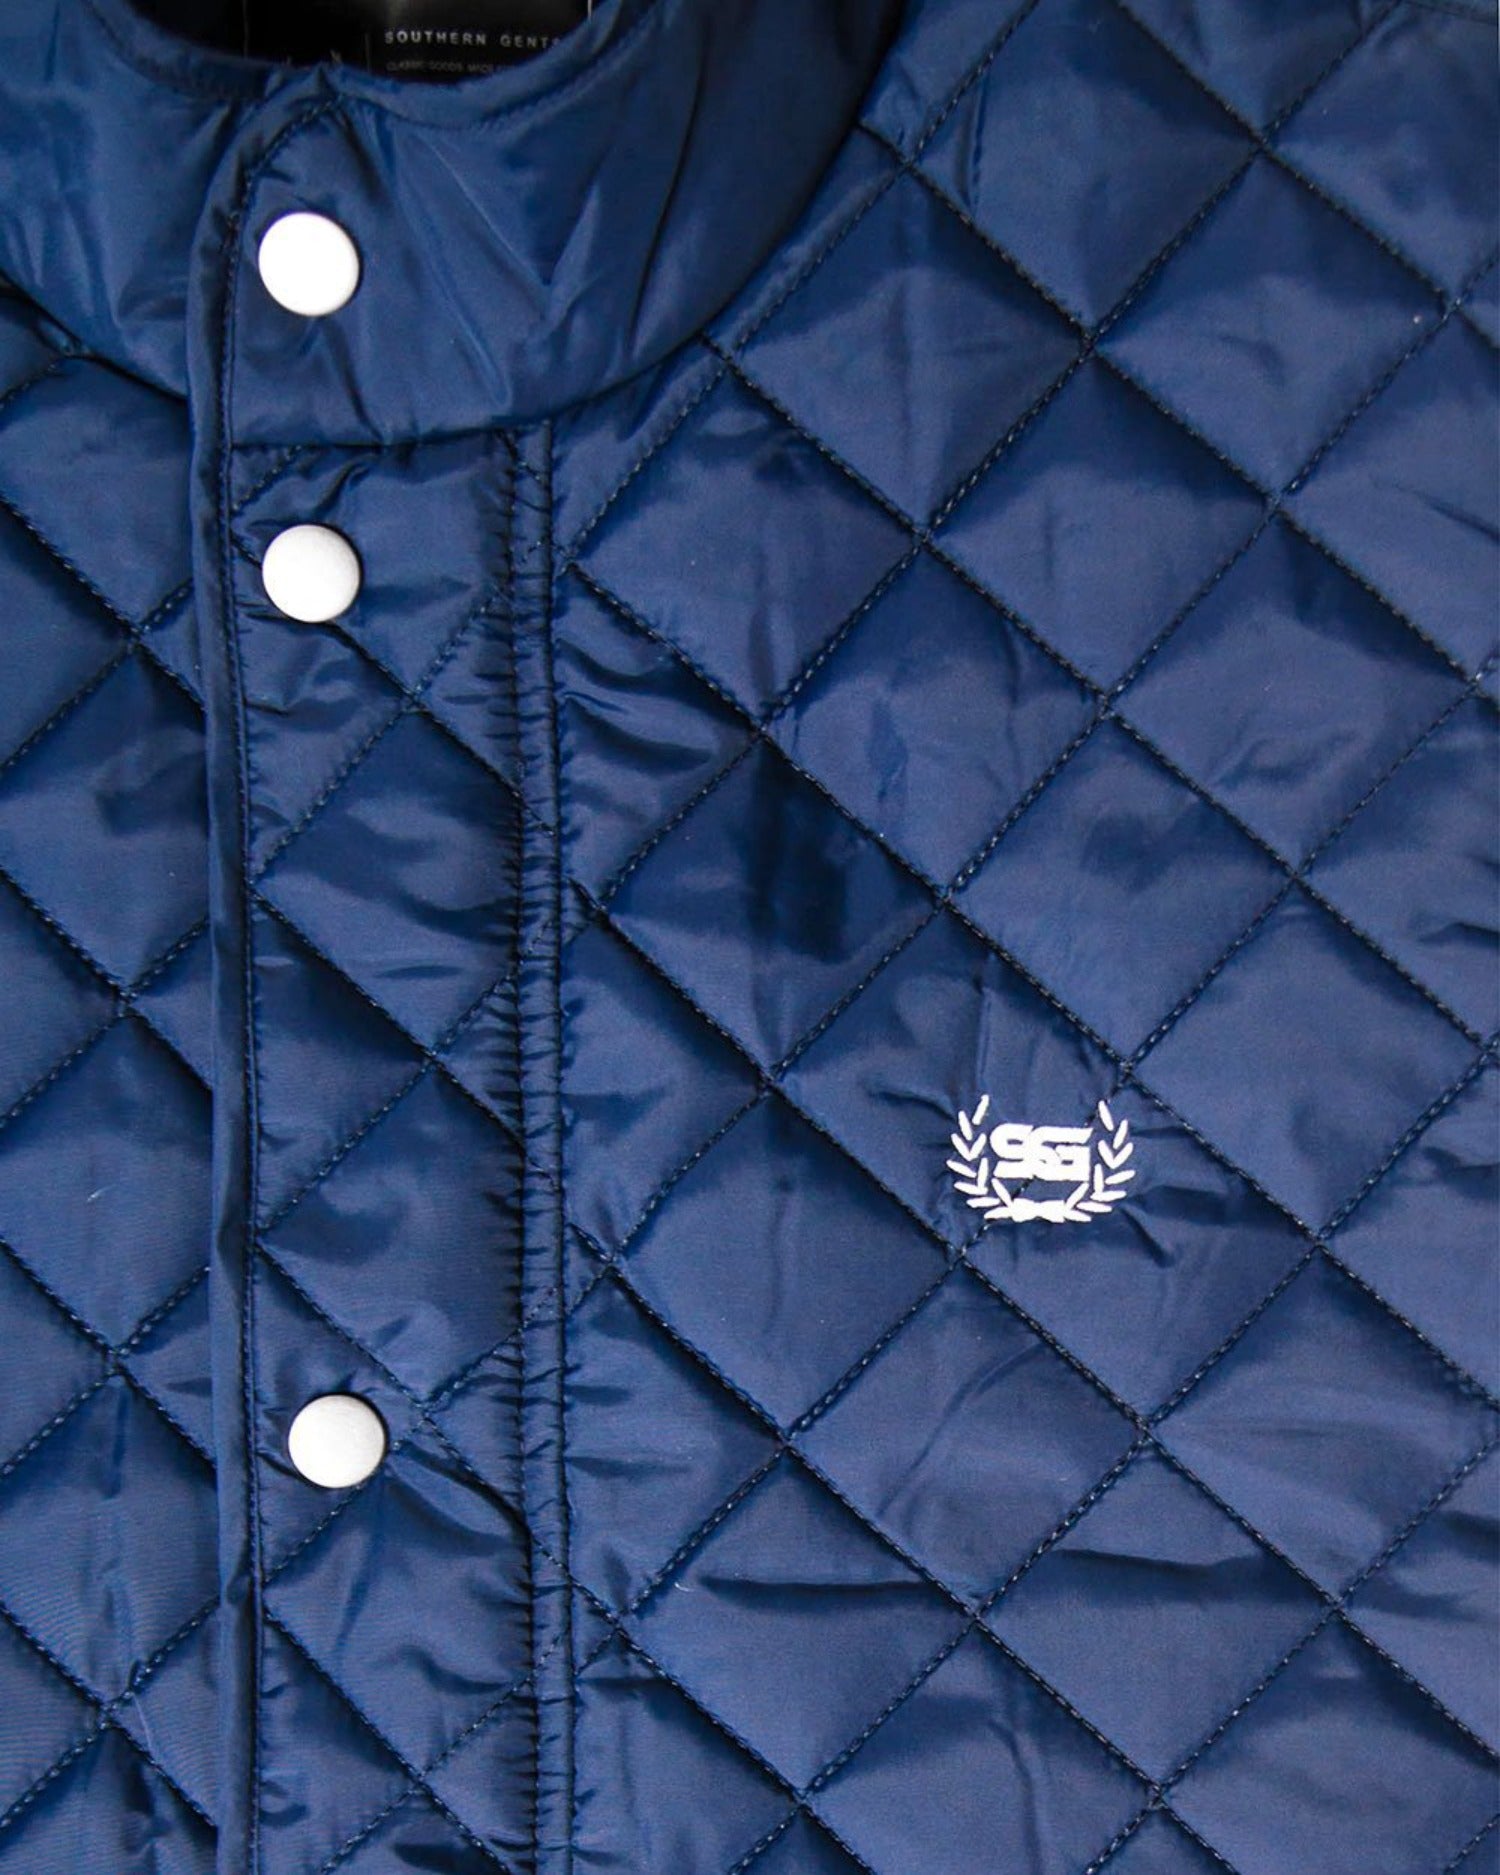 Southern Quilted Vest - Navy